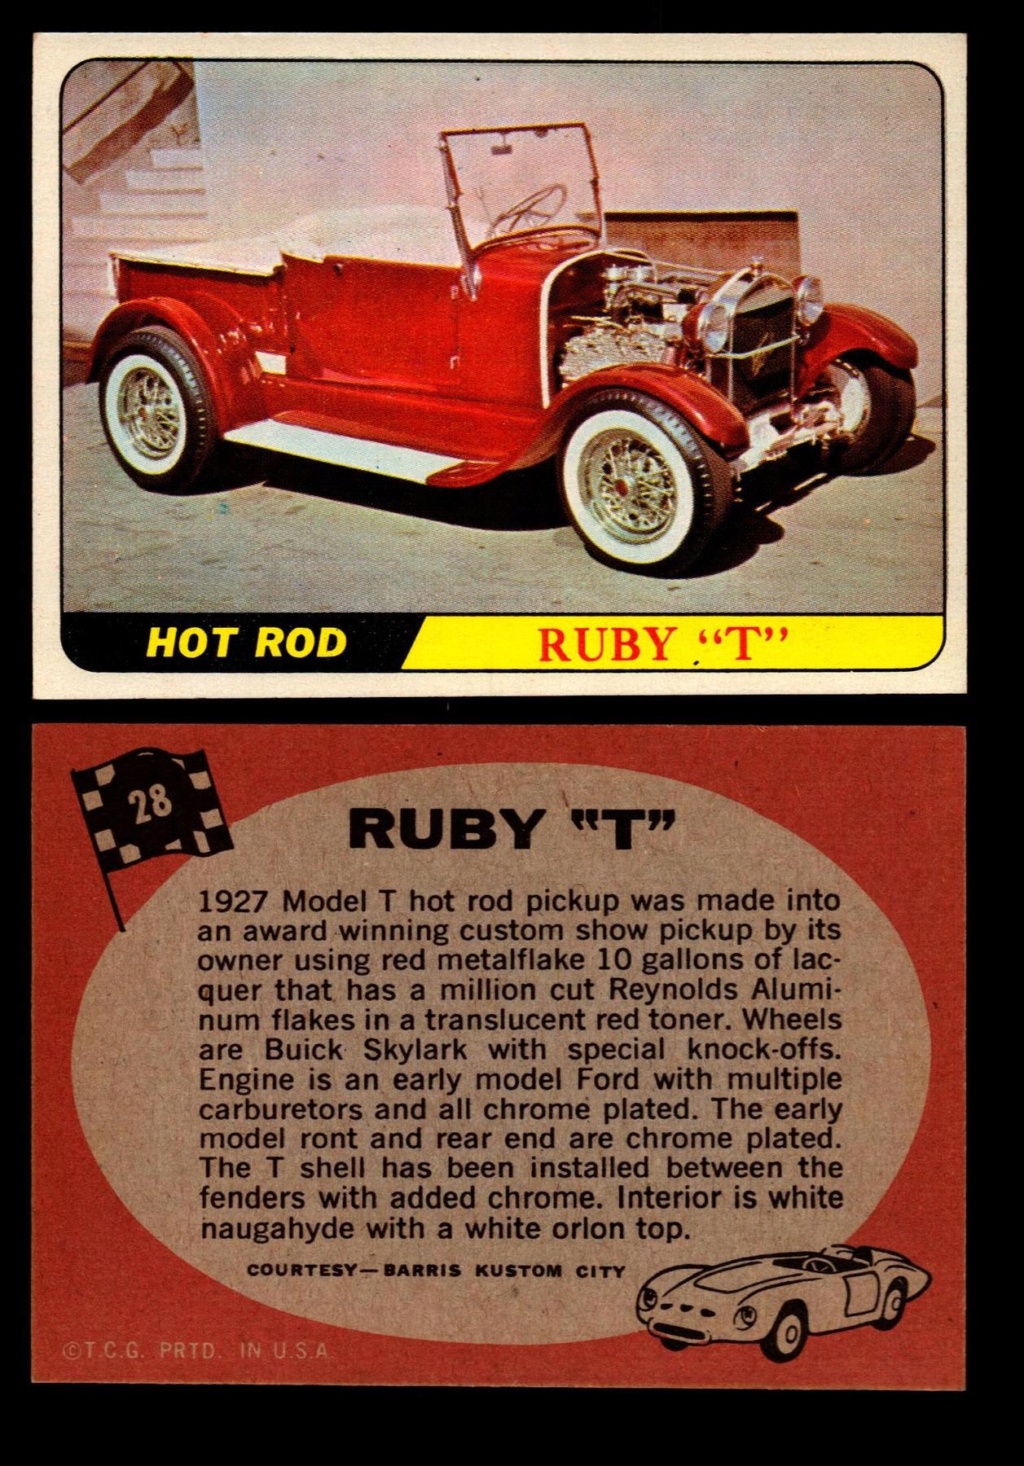 Hot Rods Topps - Vintage Trading Cards 1968 - Custom car - Dragster - Racer - Dream car - Barris Kustom City - Ed Roth Darrill Starbird, Gene Winfield, Bill Cuchenberry - Page 2 28_c9d10